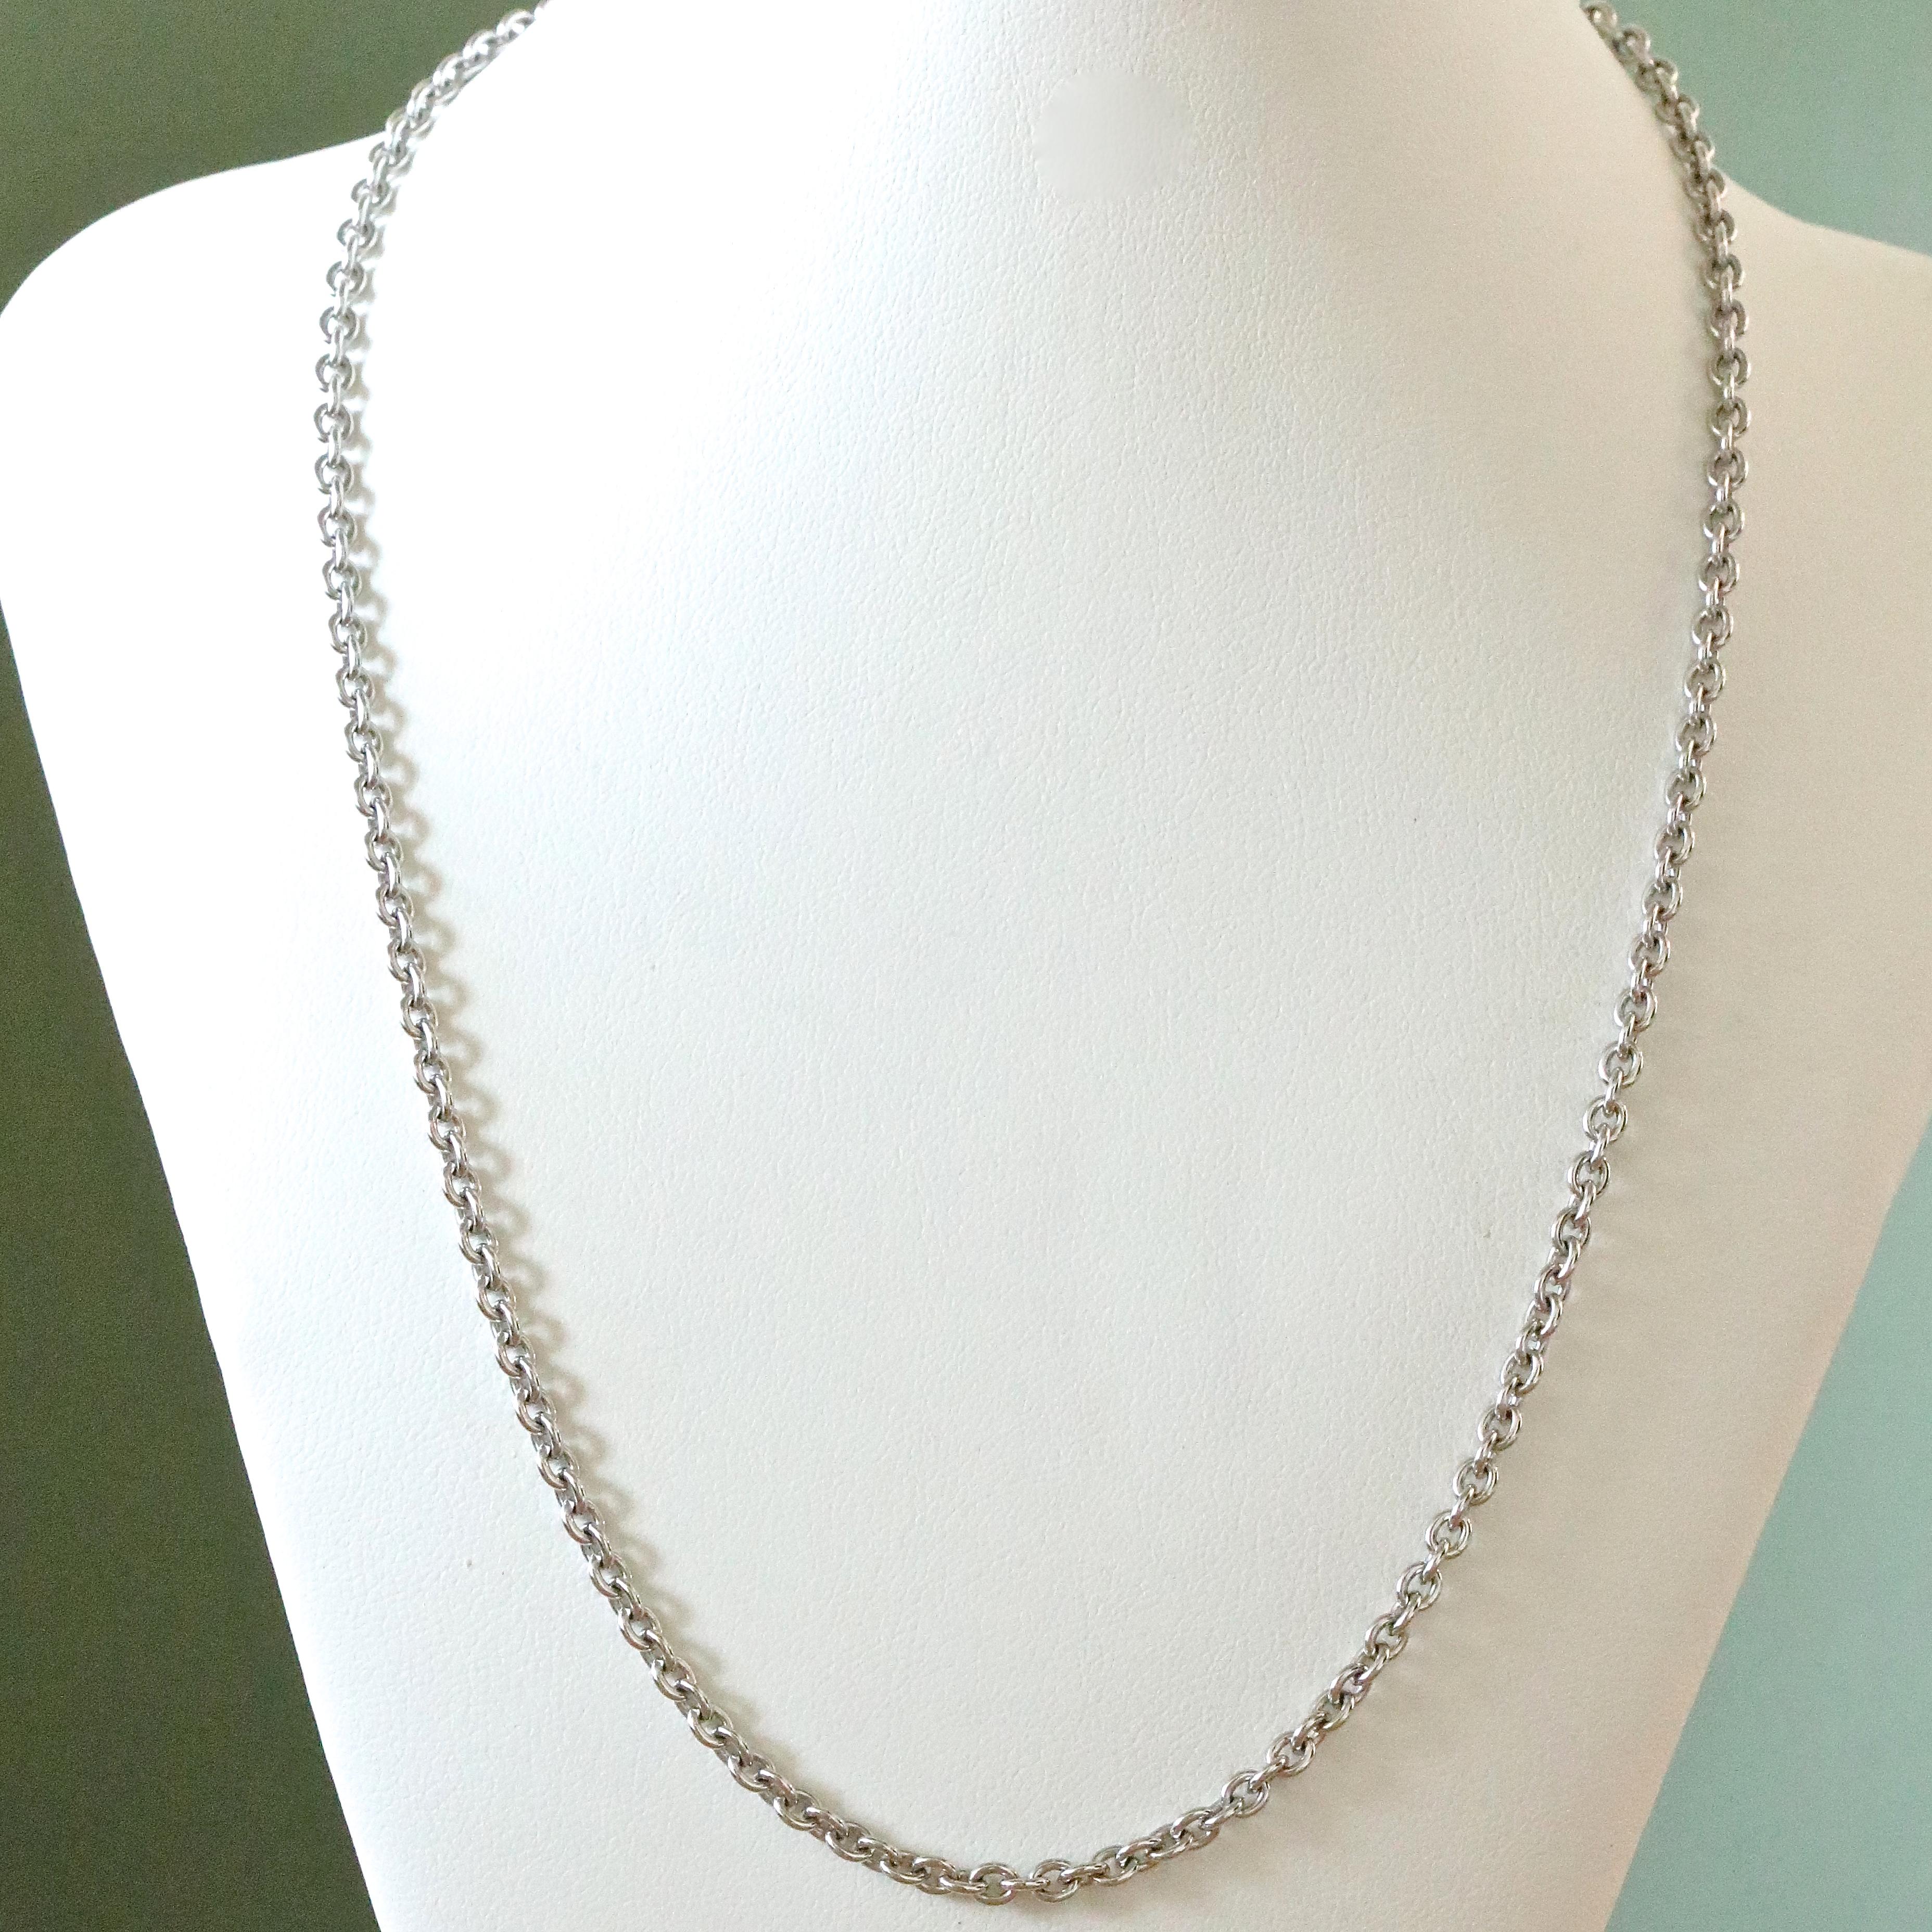 Classic and timeless, this Bulgari necklace from the Catene collection is a perfect everyday accessory. Wear it with jeans and sweater or a beautiful evening dress; you will not go wrong. The 18k white gold necklace length is 16 inches.

Flawless